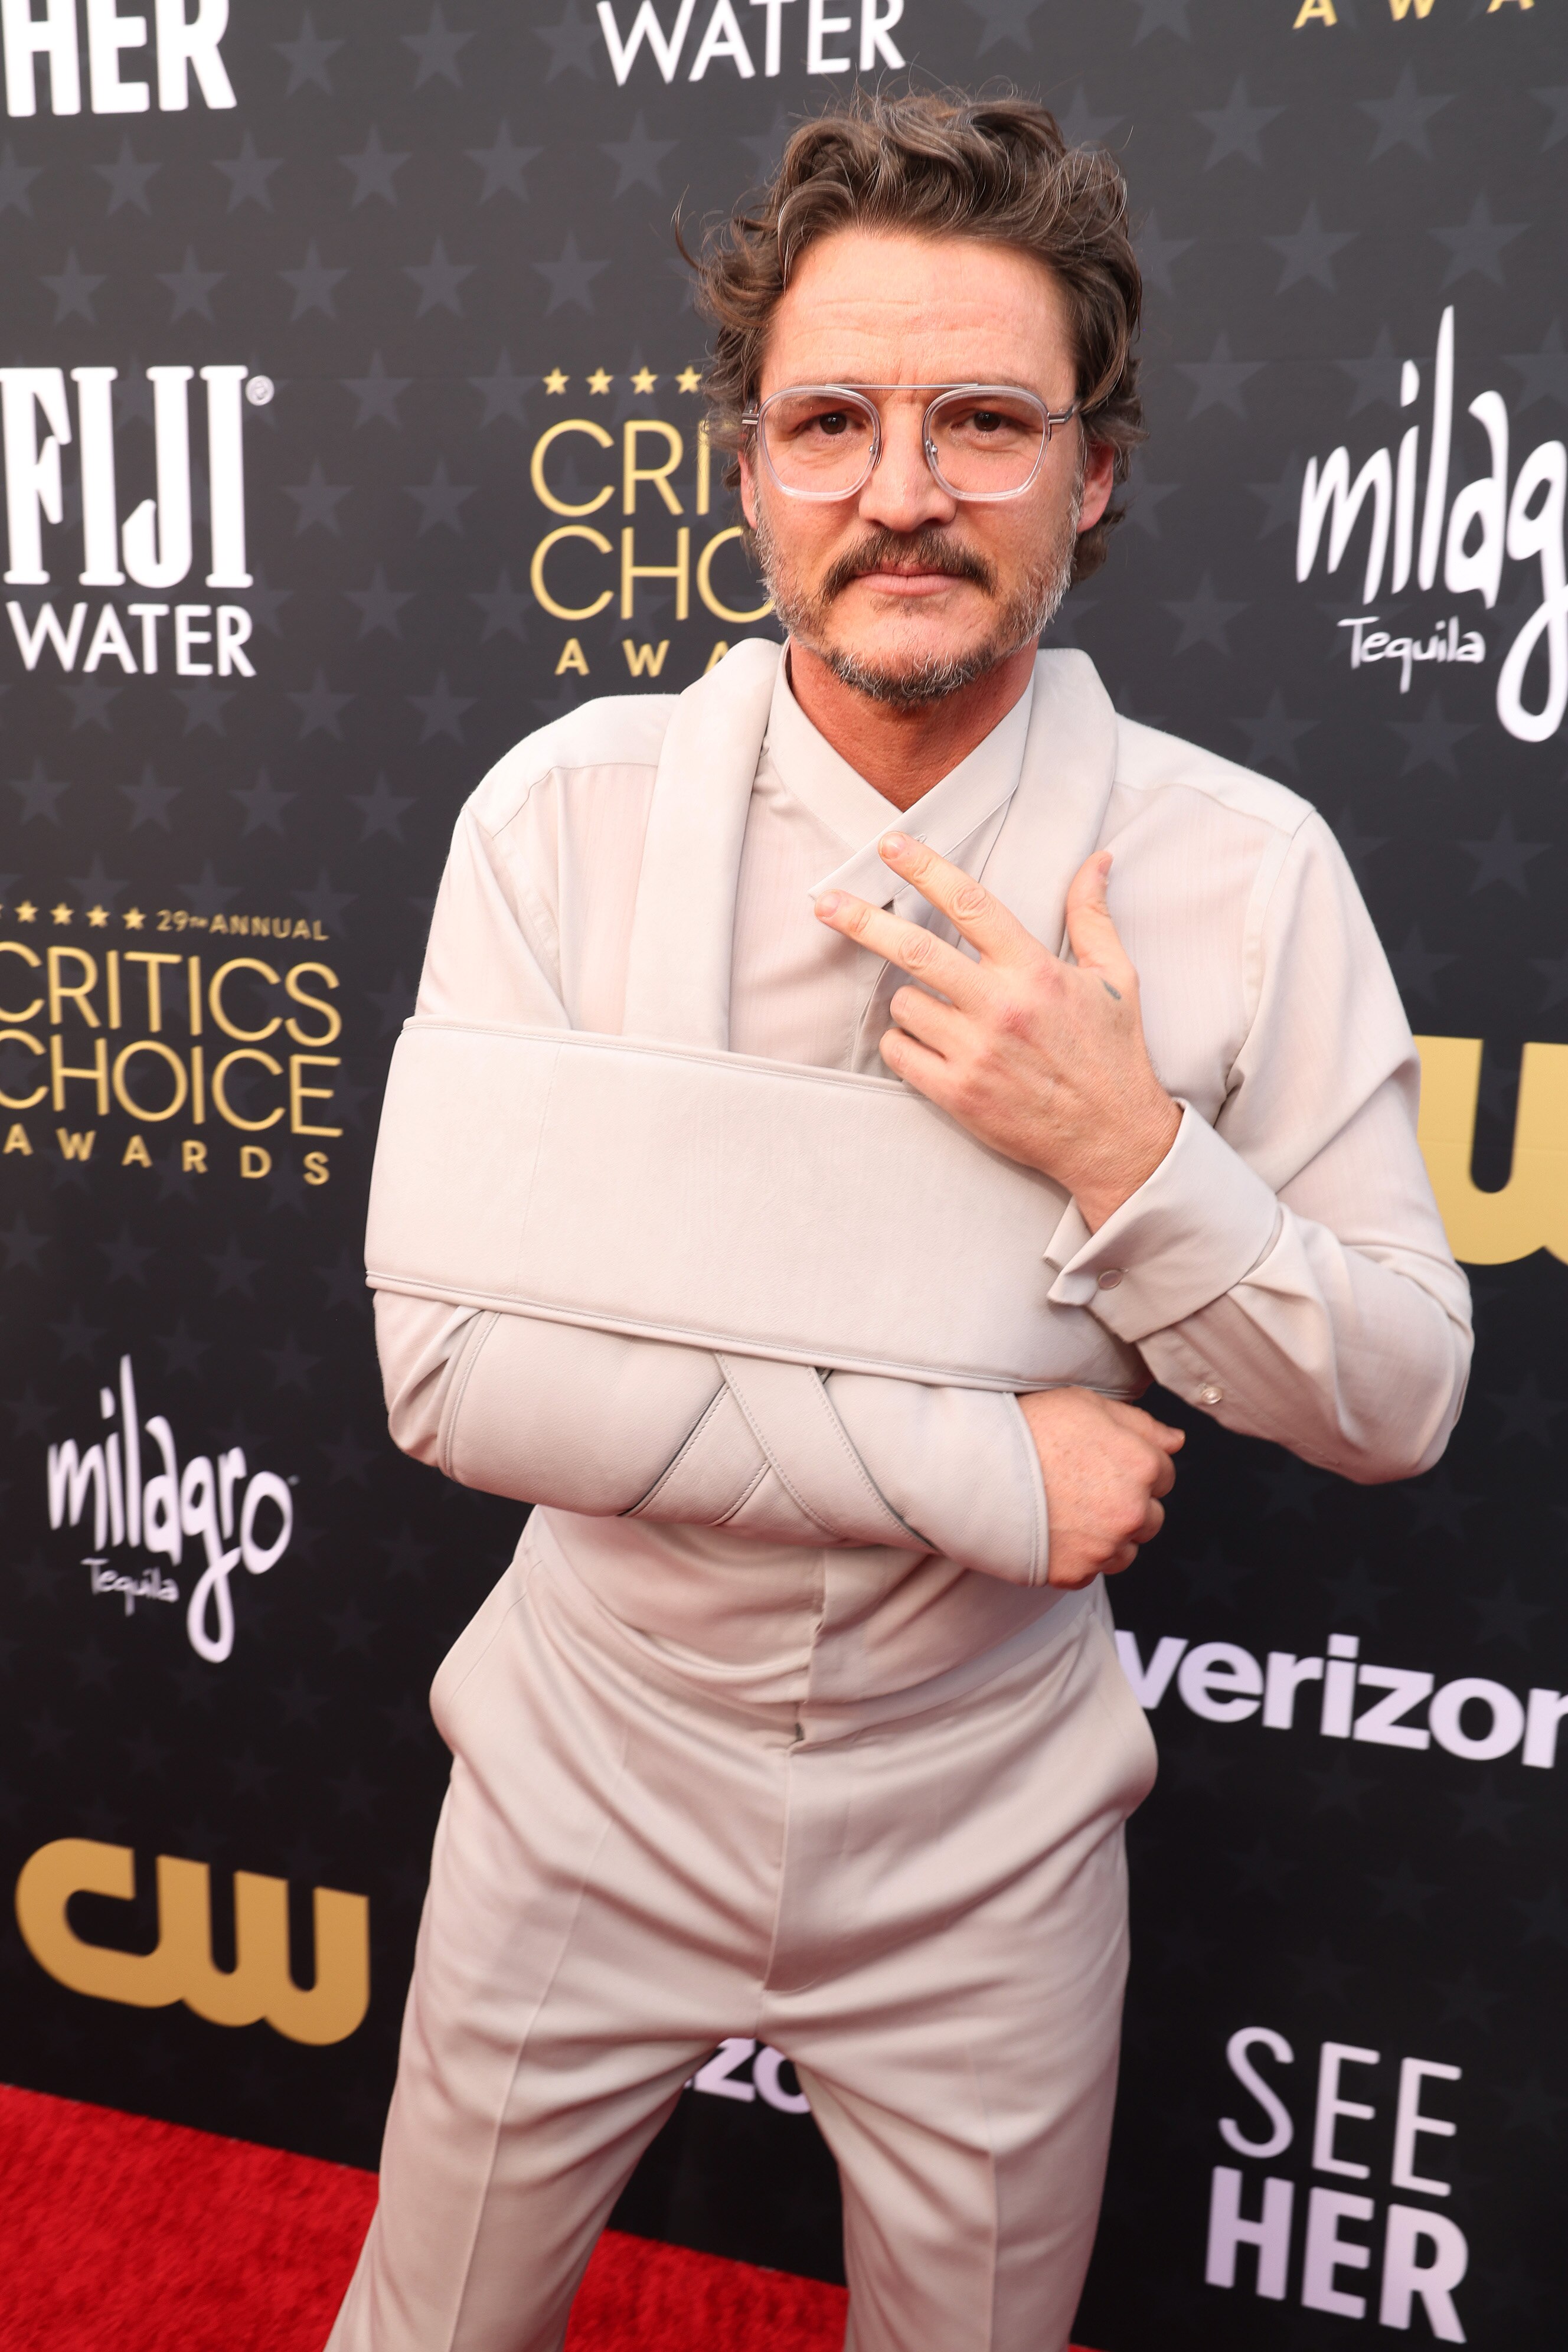 Pedro Pascal wearing a soft silky shirt, trousers and arm sling all in the exact same off-white tone